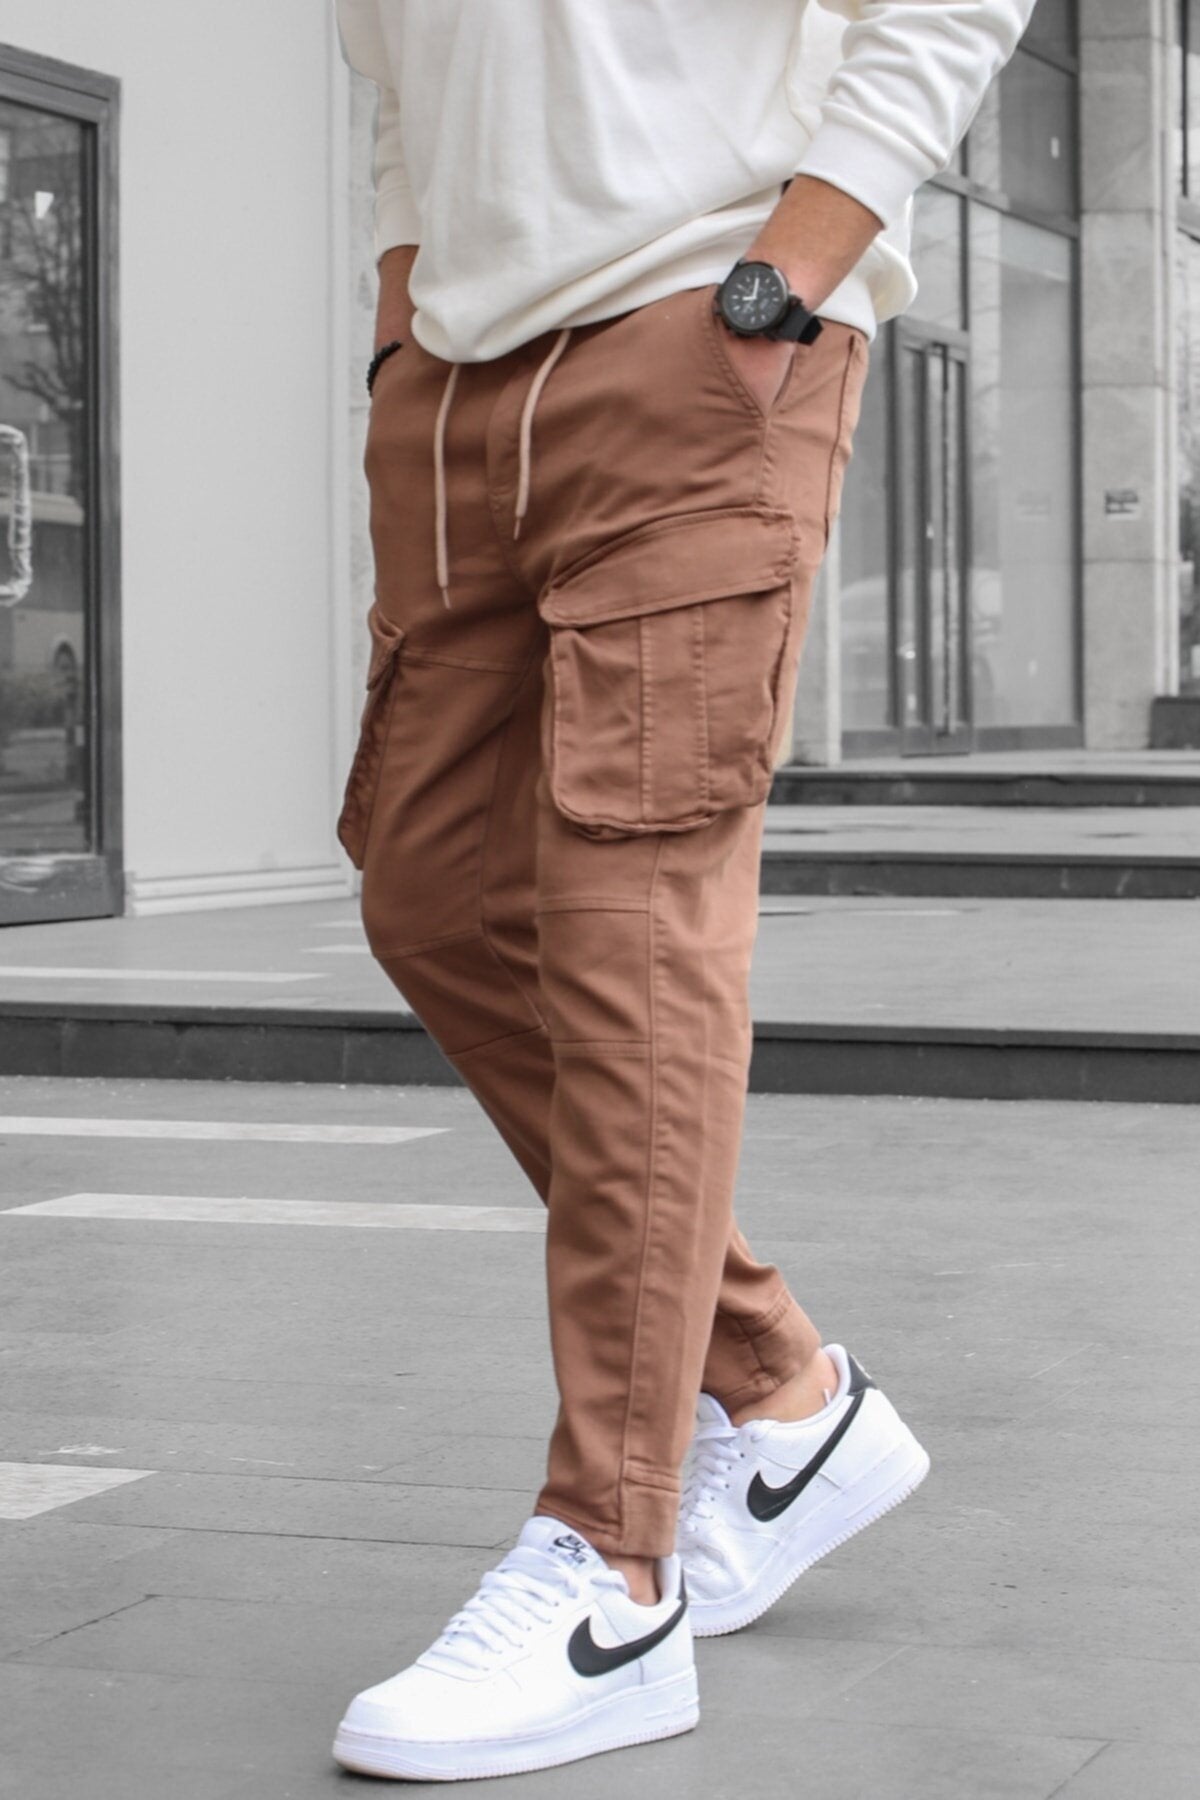 Shop Men's Cargo Pants - Camo, Skinny, Military, & Other Styles